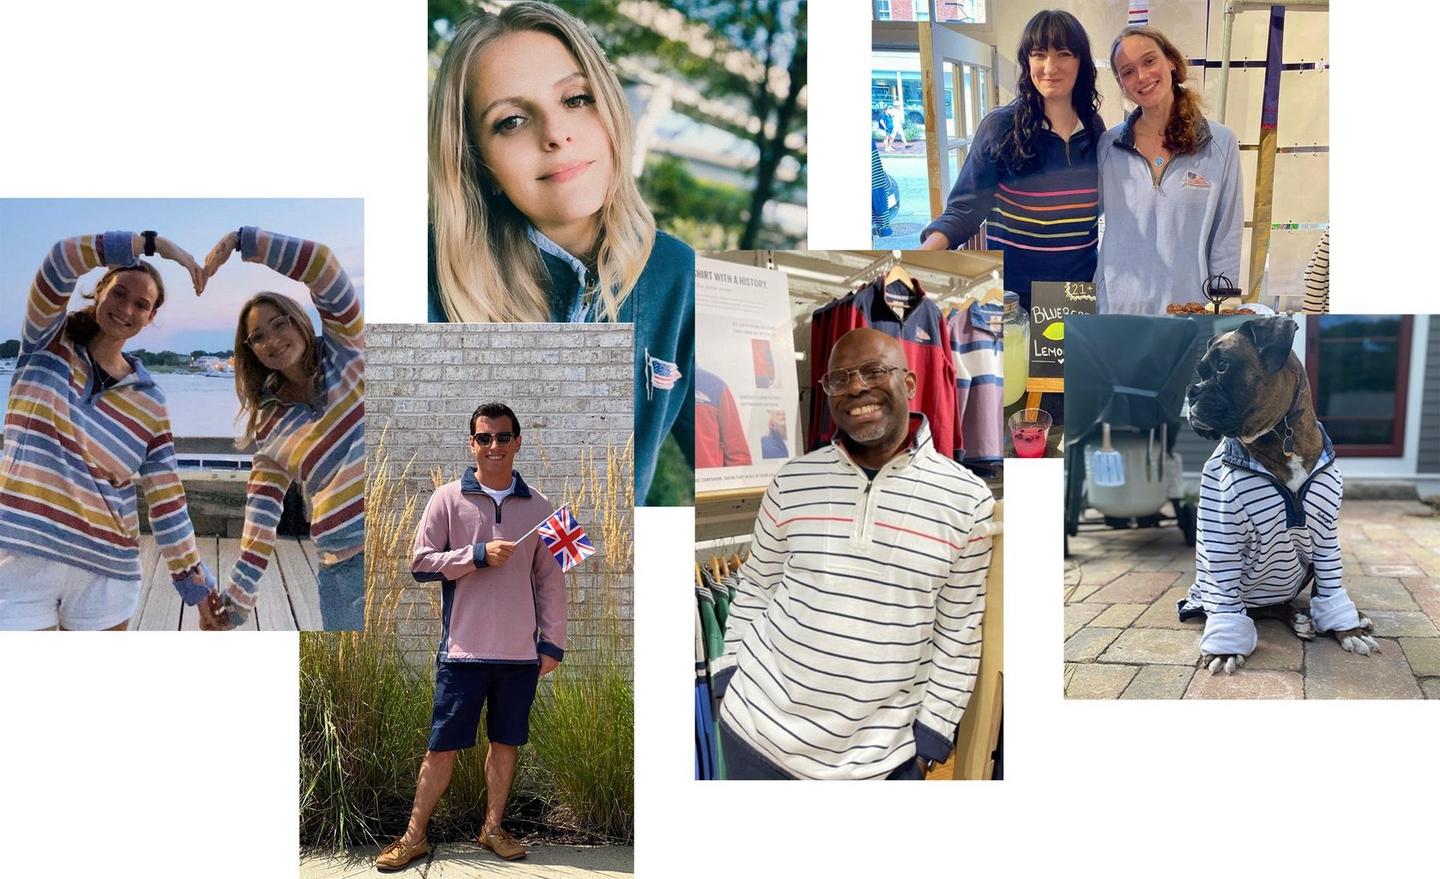 Women, men, and even a dog wearing various striped and colorblock style Airlie sweatshirts.